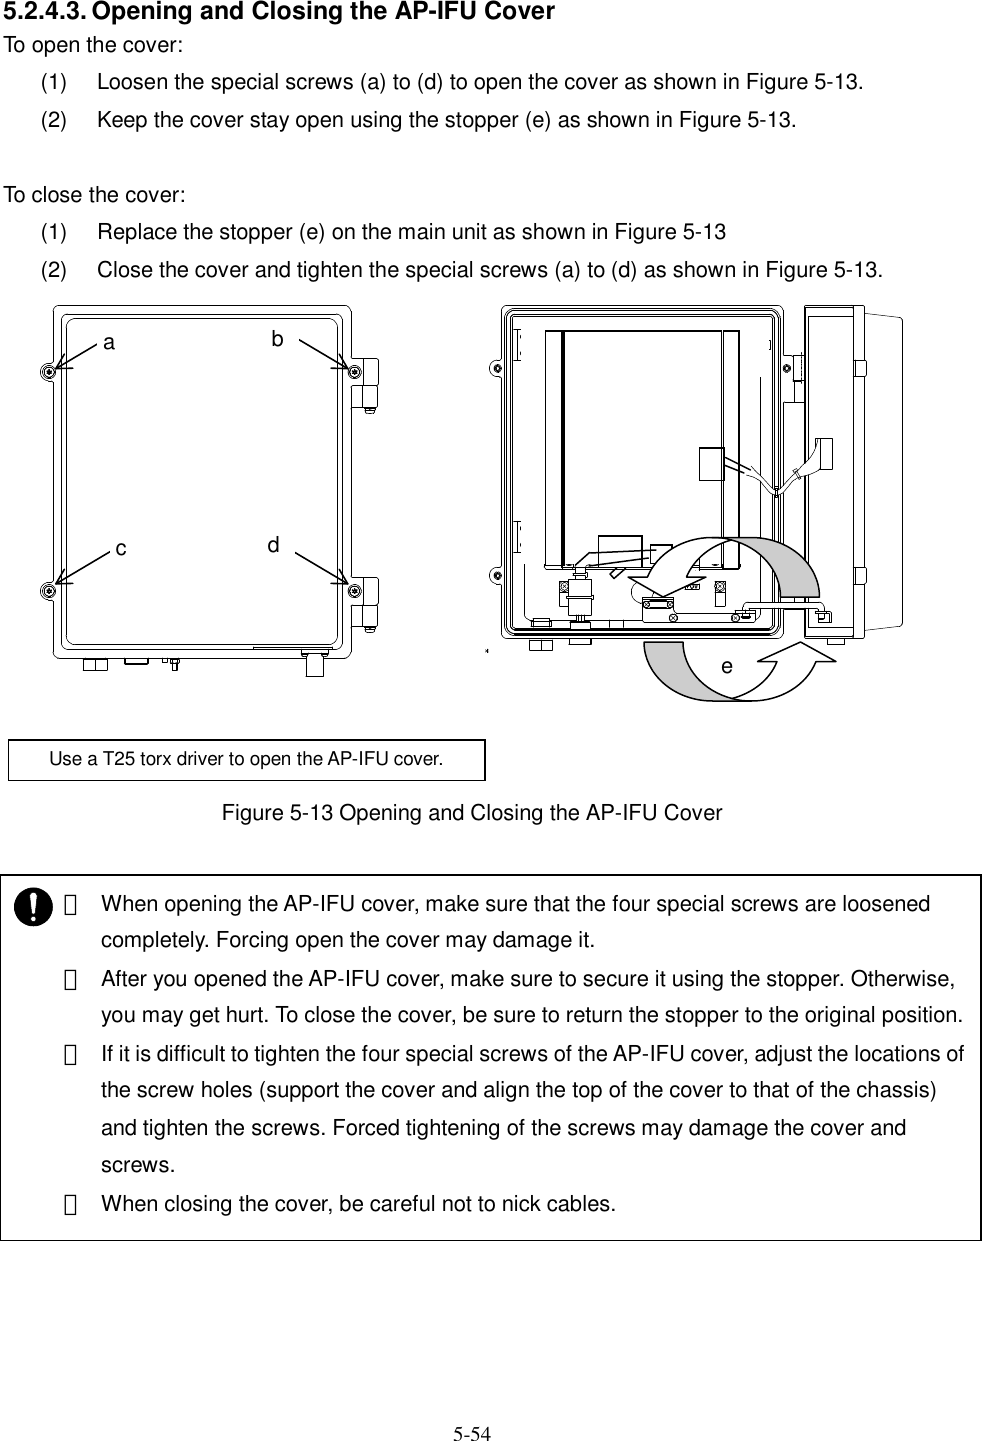   5-54   5.2.4.3. Opening and Closing the AP-IFU Cover To open the cover: (1)  Loosen the special screws (a) to (d) to open the cover as shown in Figure 5-13. (2)  Keep the cover stay open using the stopper (e) as shown in Figure 5-13.  To close the cover: (1)  Replace the stopper (e) on the main unit as shown in Figure 5-13 (2)  Close the cover and tighten the special screws (a) to (d) as shown in Figure 5-13.  Figure 5-13 Opening and Closing the AP-IFU Cover  ⑤ a bc deUse a T25 torx driver to open the AP-IFU cover.    ・ When opening the AP-IFU cover, make sure that the four special screws are loosened completely. Forcing open the cover may damage it.   ・ After you opened the AP-IFU cover, make sure to secure it using the stopper. Otherwise, you may get hurt. To close the cover, be sure to return the stopper to the original position. ・ If it is difficult to tighten the four special screws of the AP-IFU cover, adjust the locations of the screw holes (support the cover and align the top of the cover to that of the chassis) and tighten the screws. Forced tightening of the screws may damage the cover and screws. ・ When closing the cover, be careful not to nick cables.  